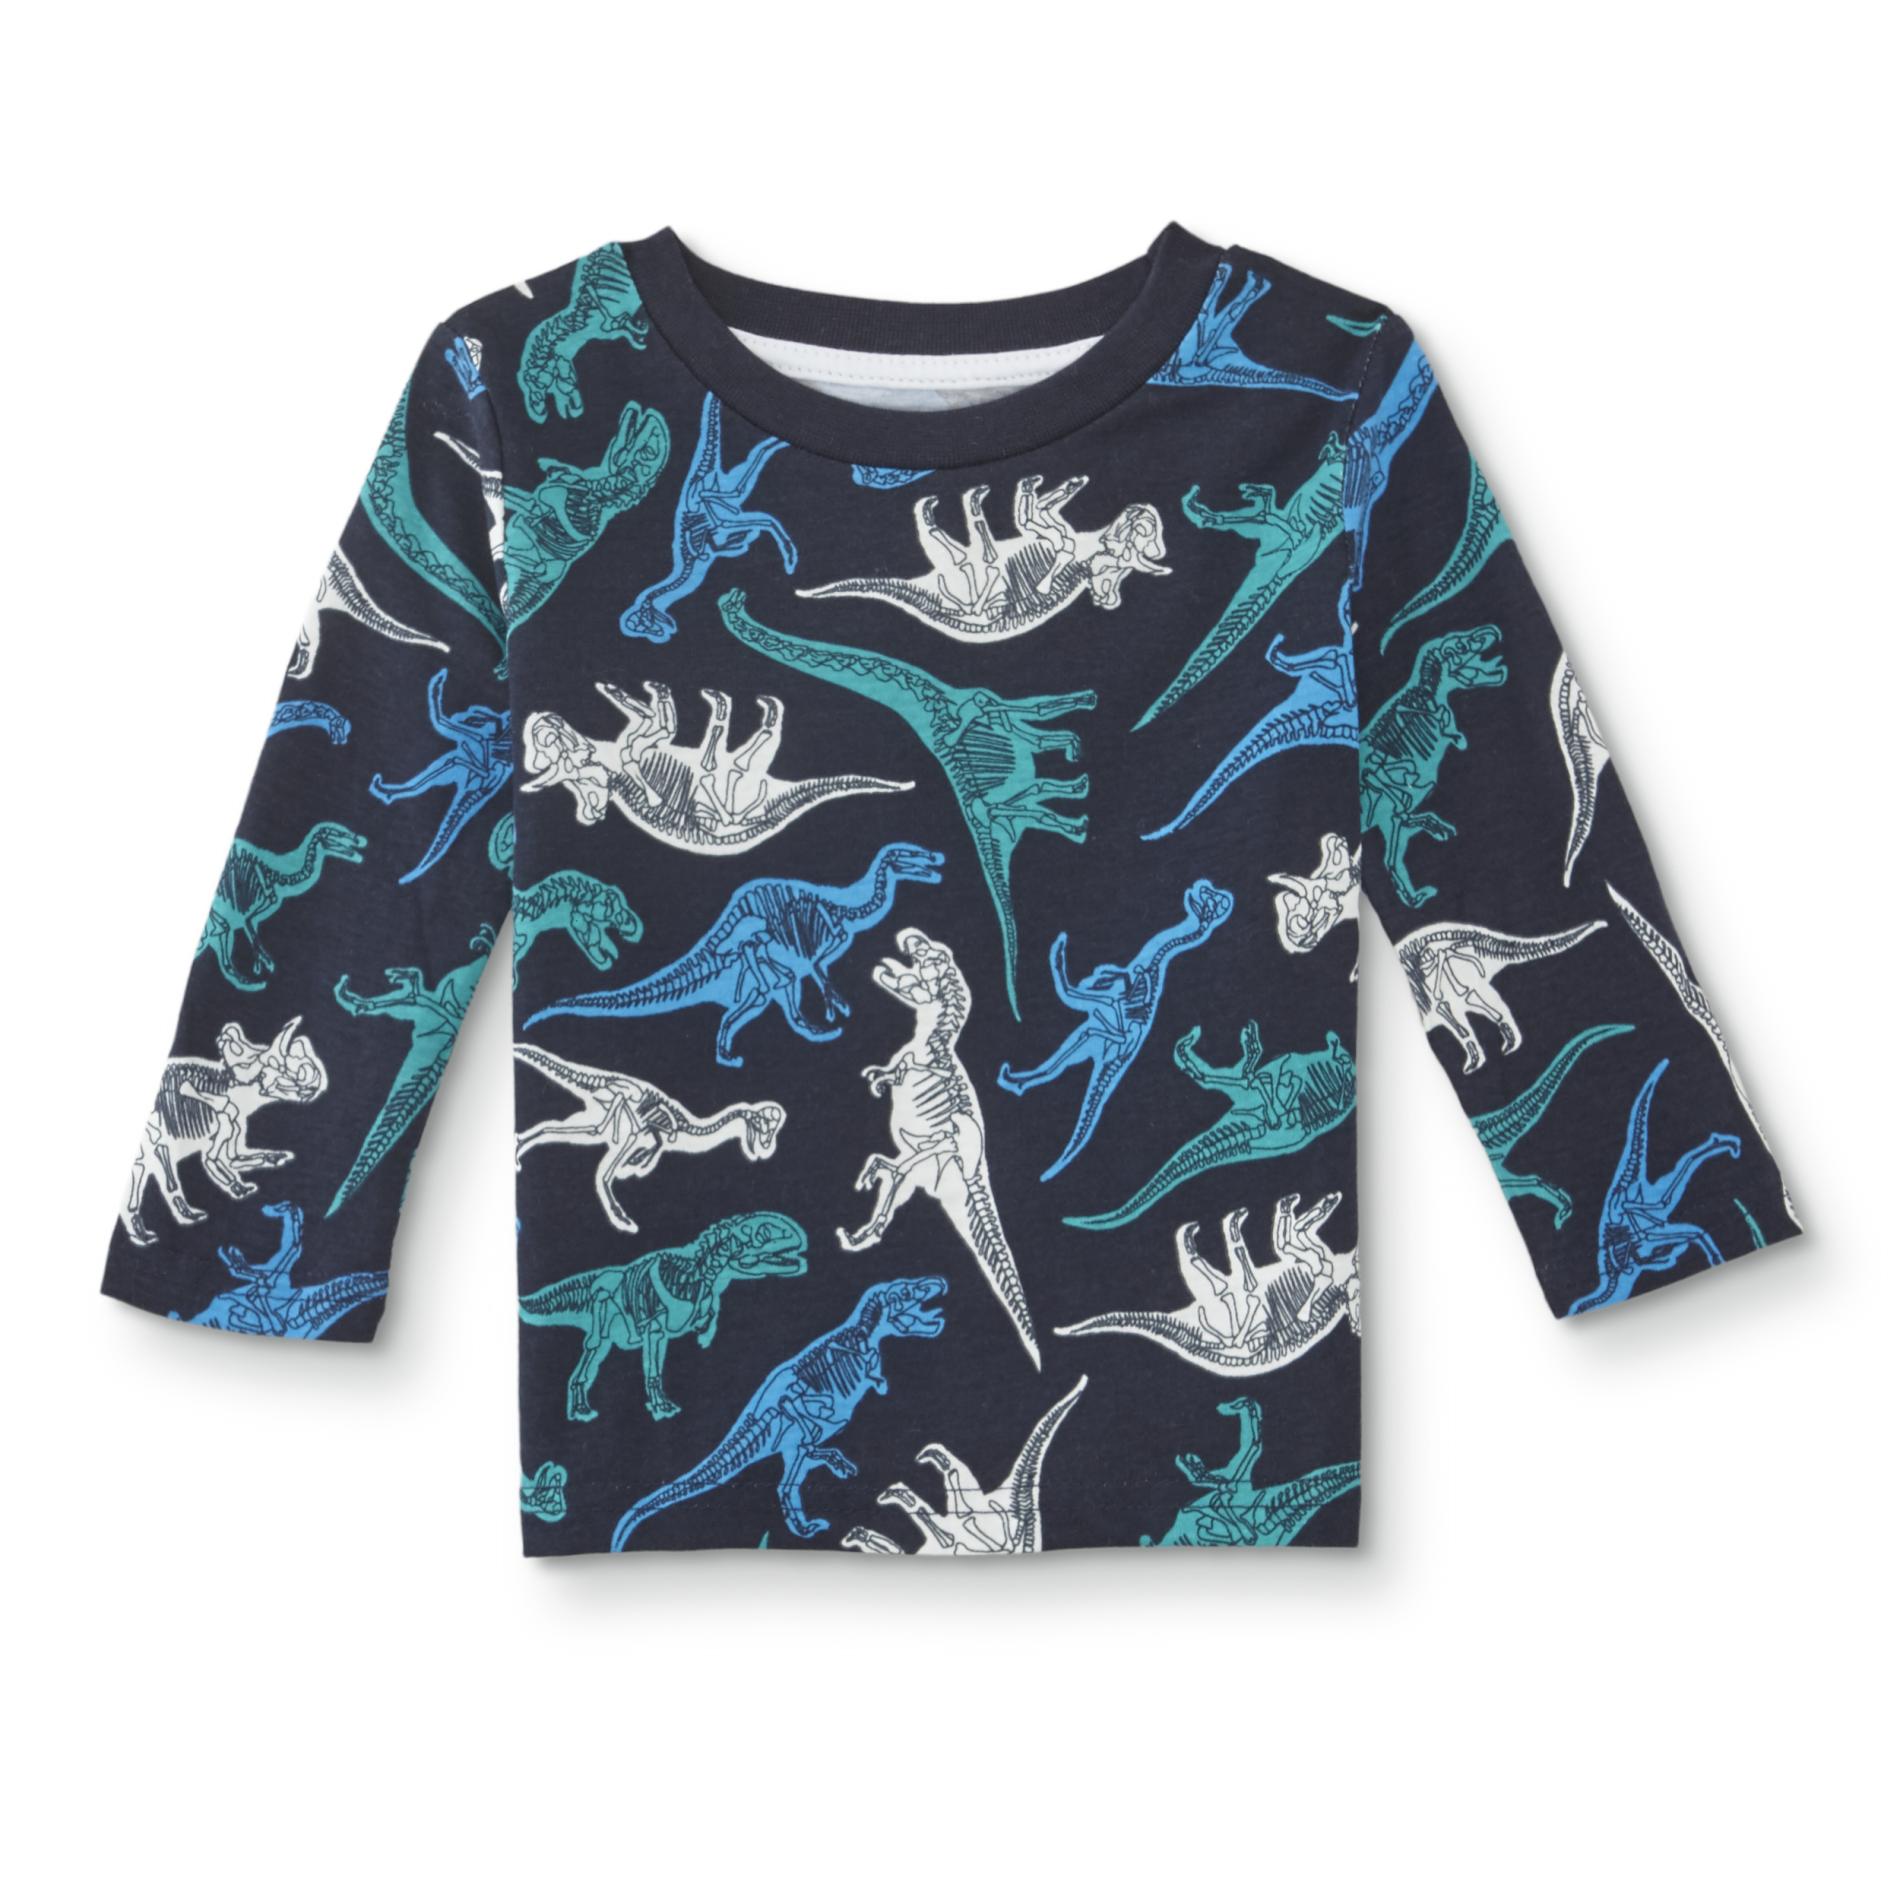 Toughskins Infant & Toddler Boys' Long-Sleeve Graphic T-Shirt - See-Through Dinosaurs